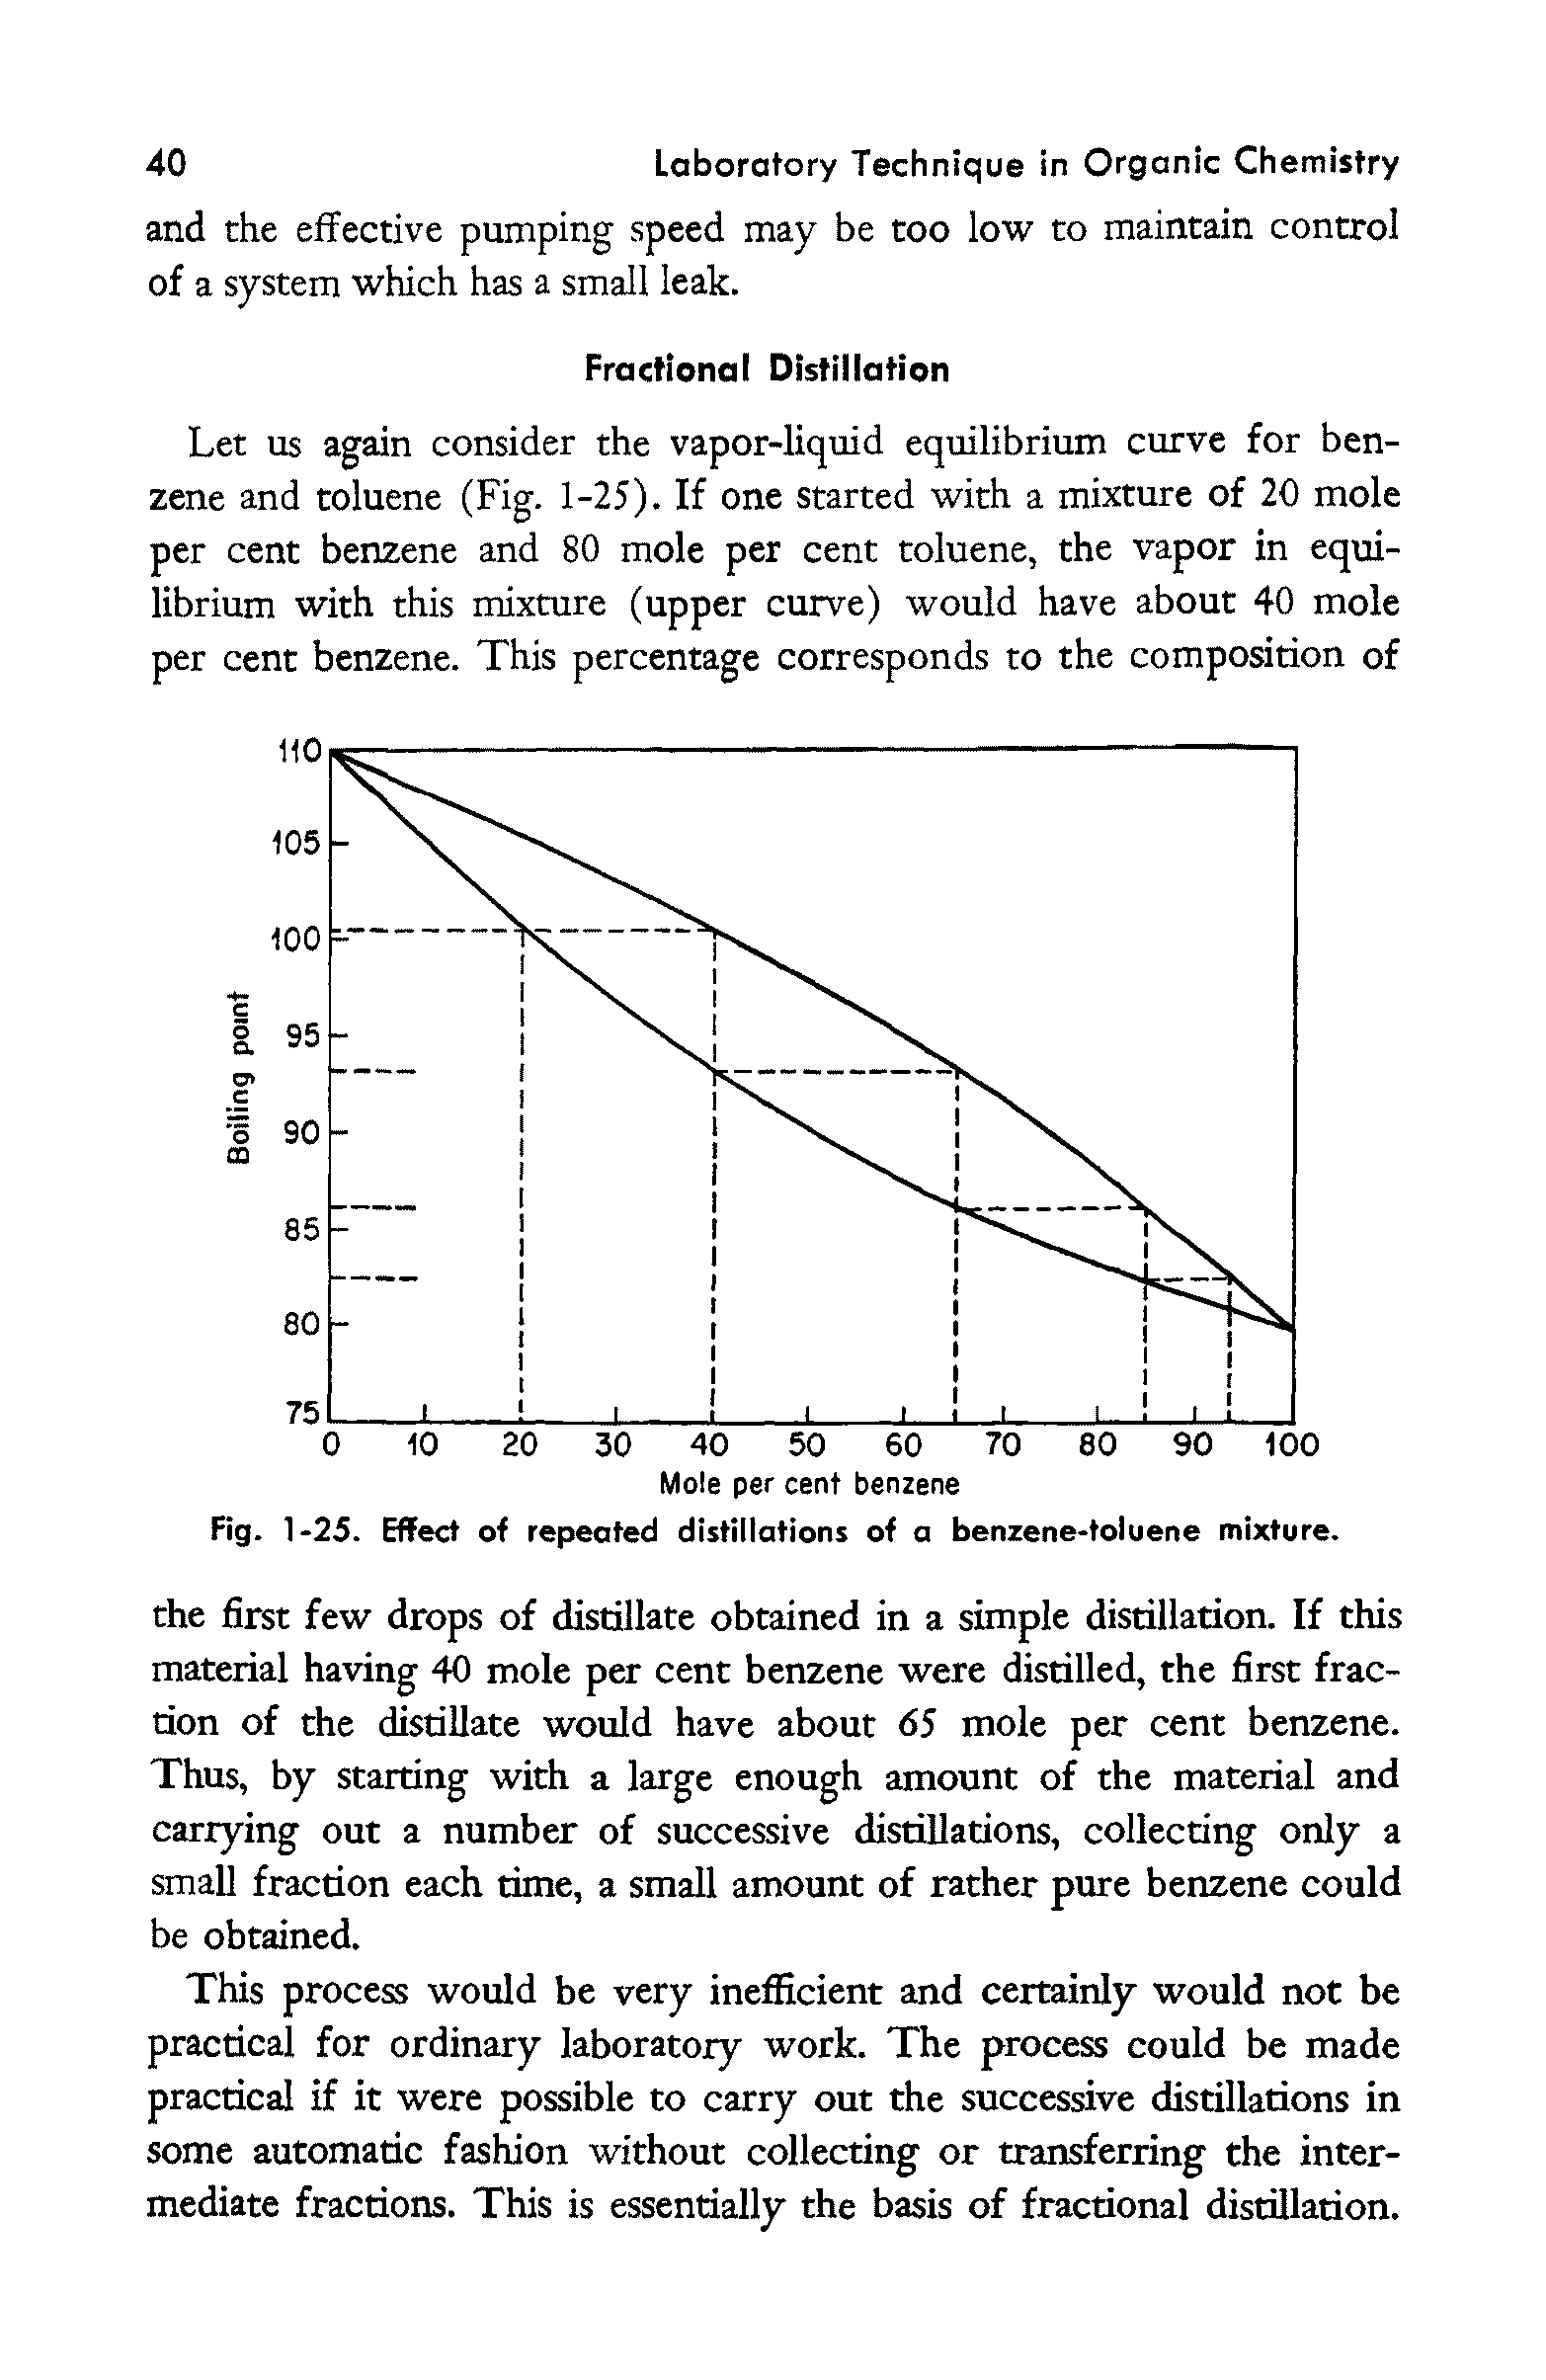 Fig. 1-25. Effect of repeated distillations of a benzene-toluene mixture.